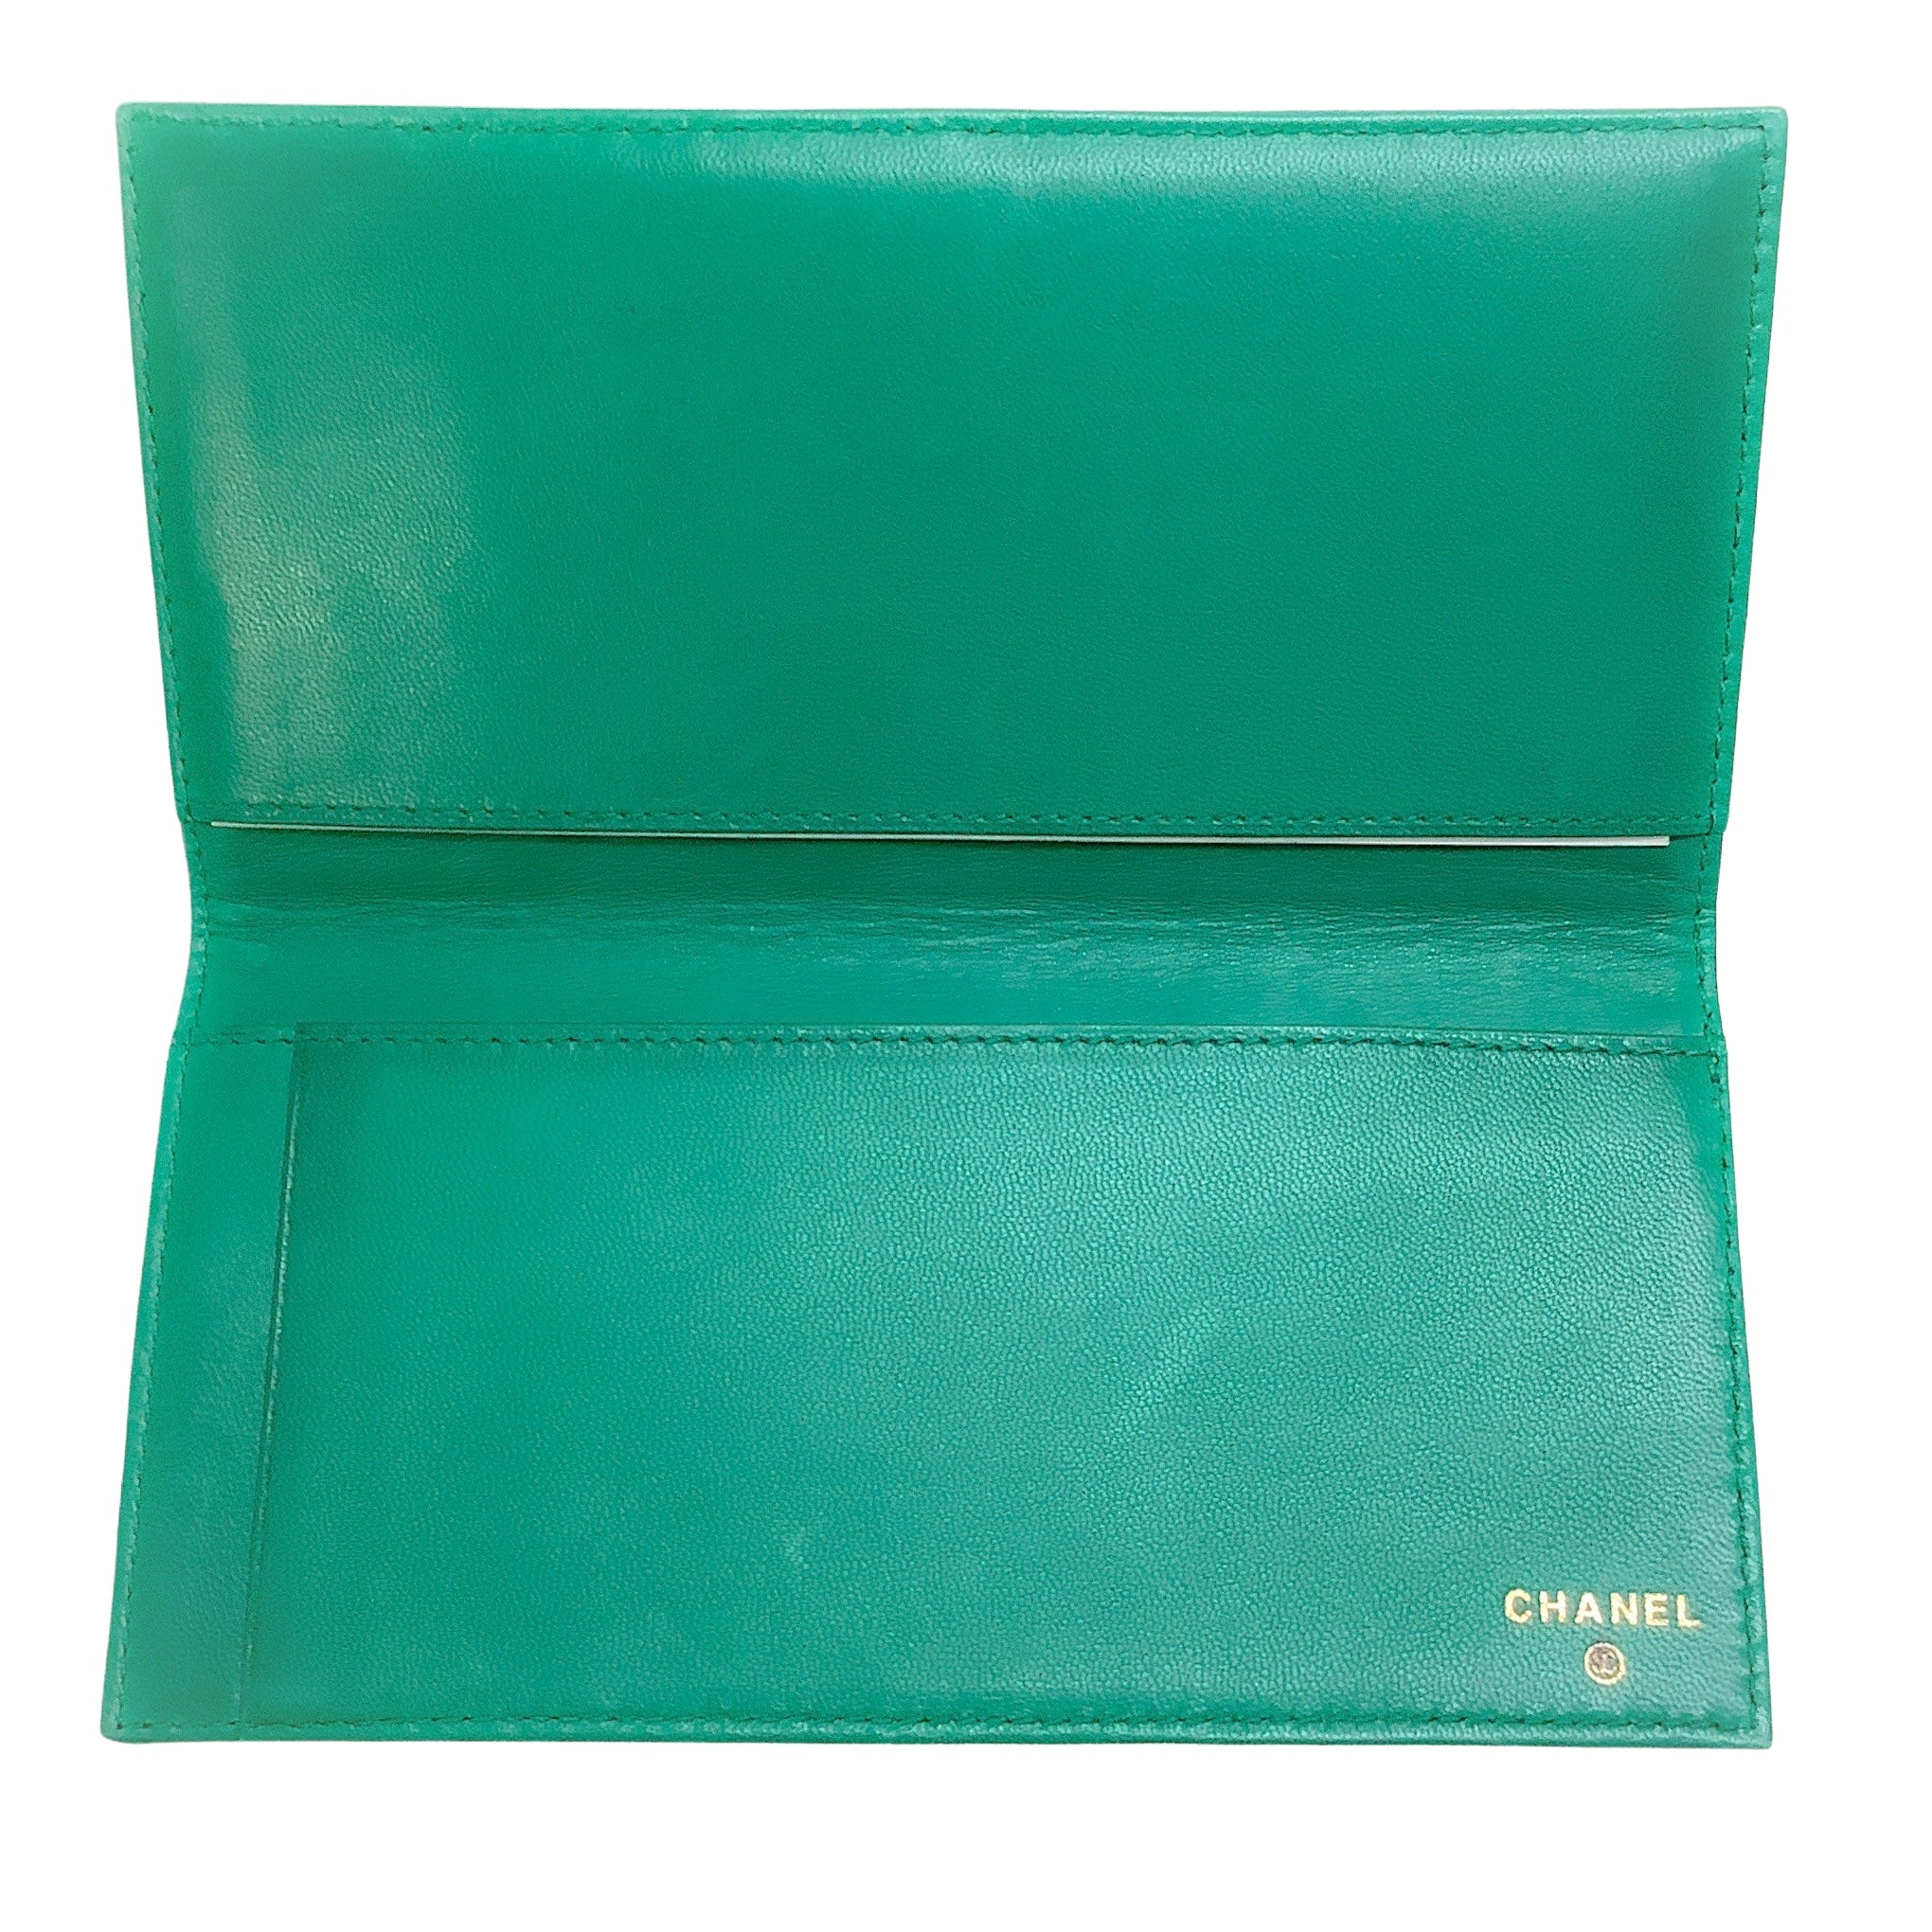 Chanel Emerald Green Leather Checkbook Cover Wallet